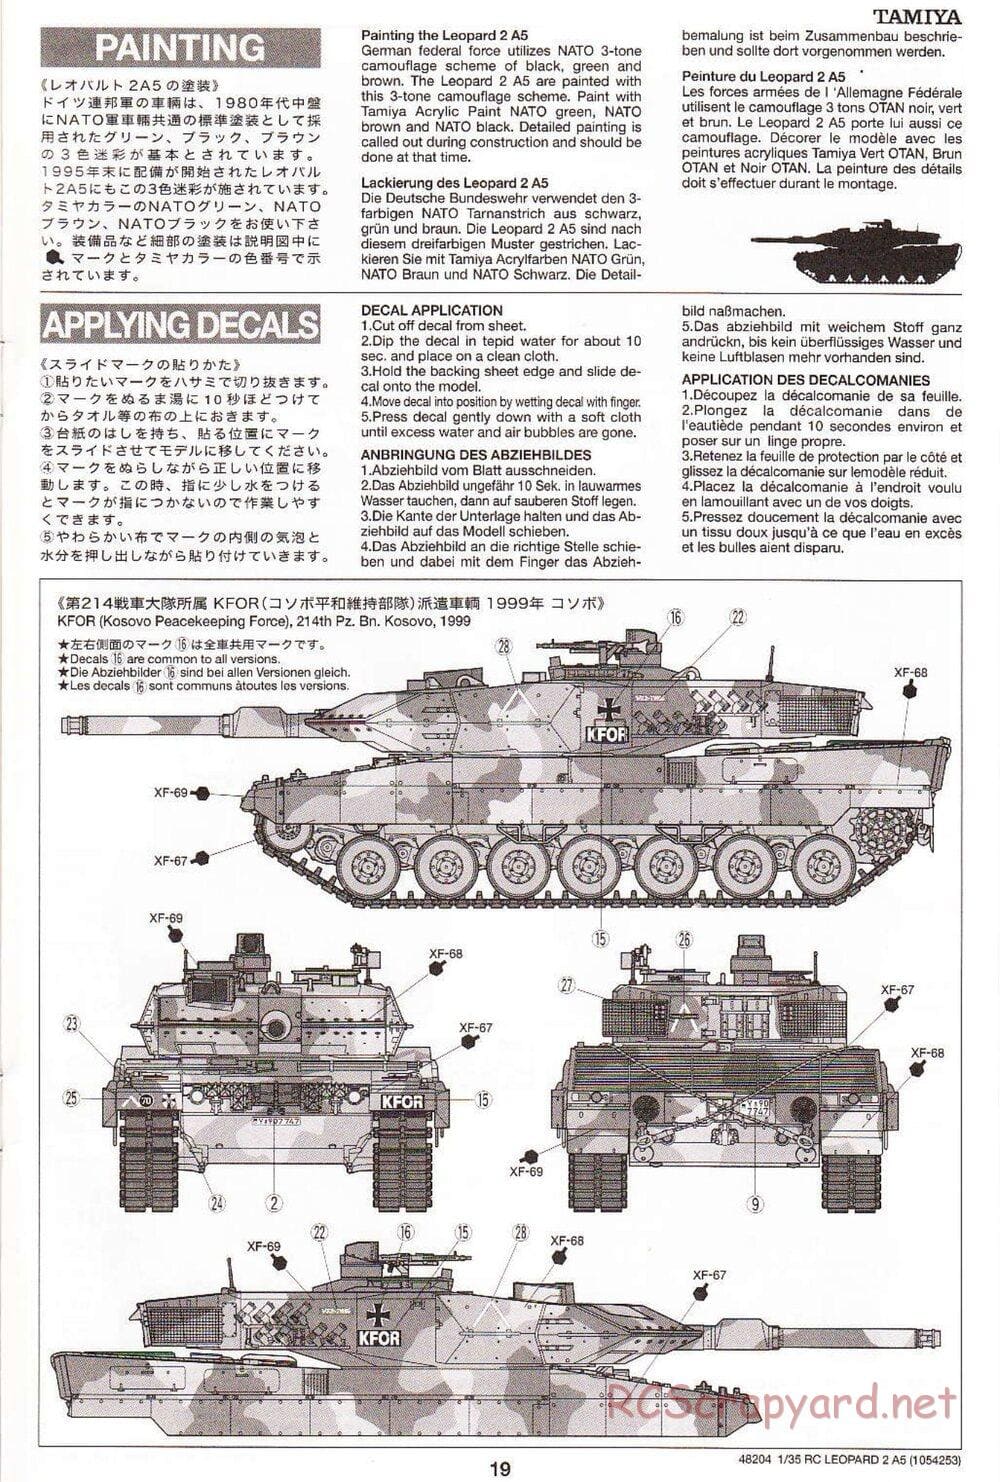 Tamiya - Leopard 2 A5 Main Battle Tank - 1/35 Scale Chassis - Manual - Page 20